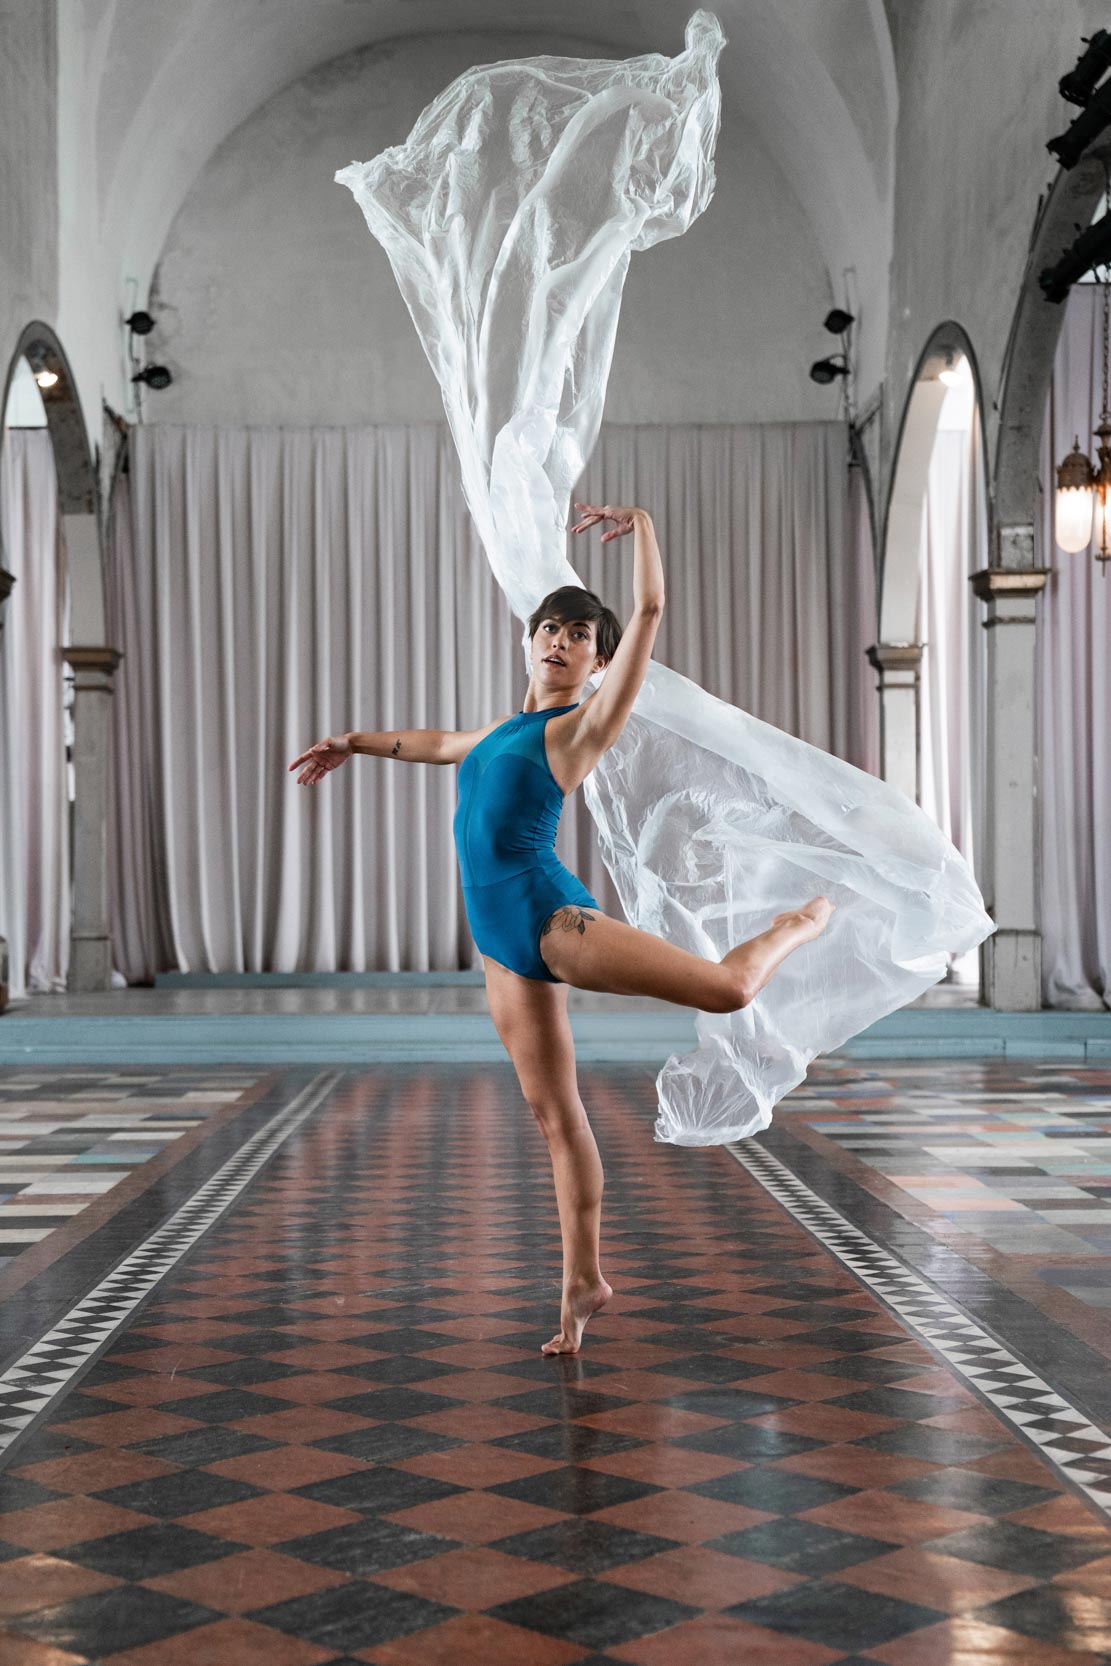 Ballet dancer performing in Marigny Opera House cathedral in New Orleans